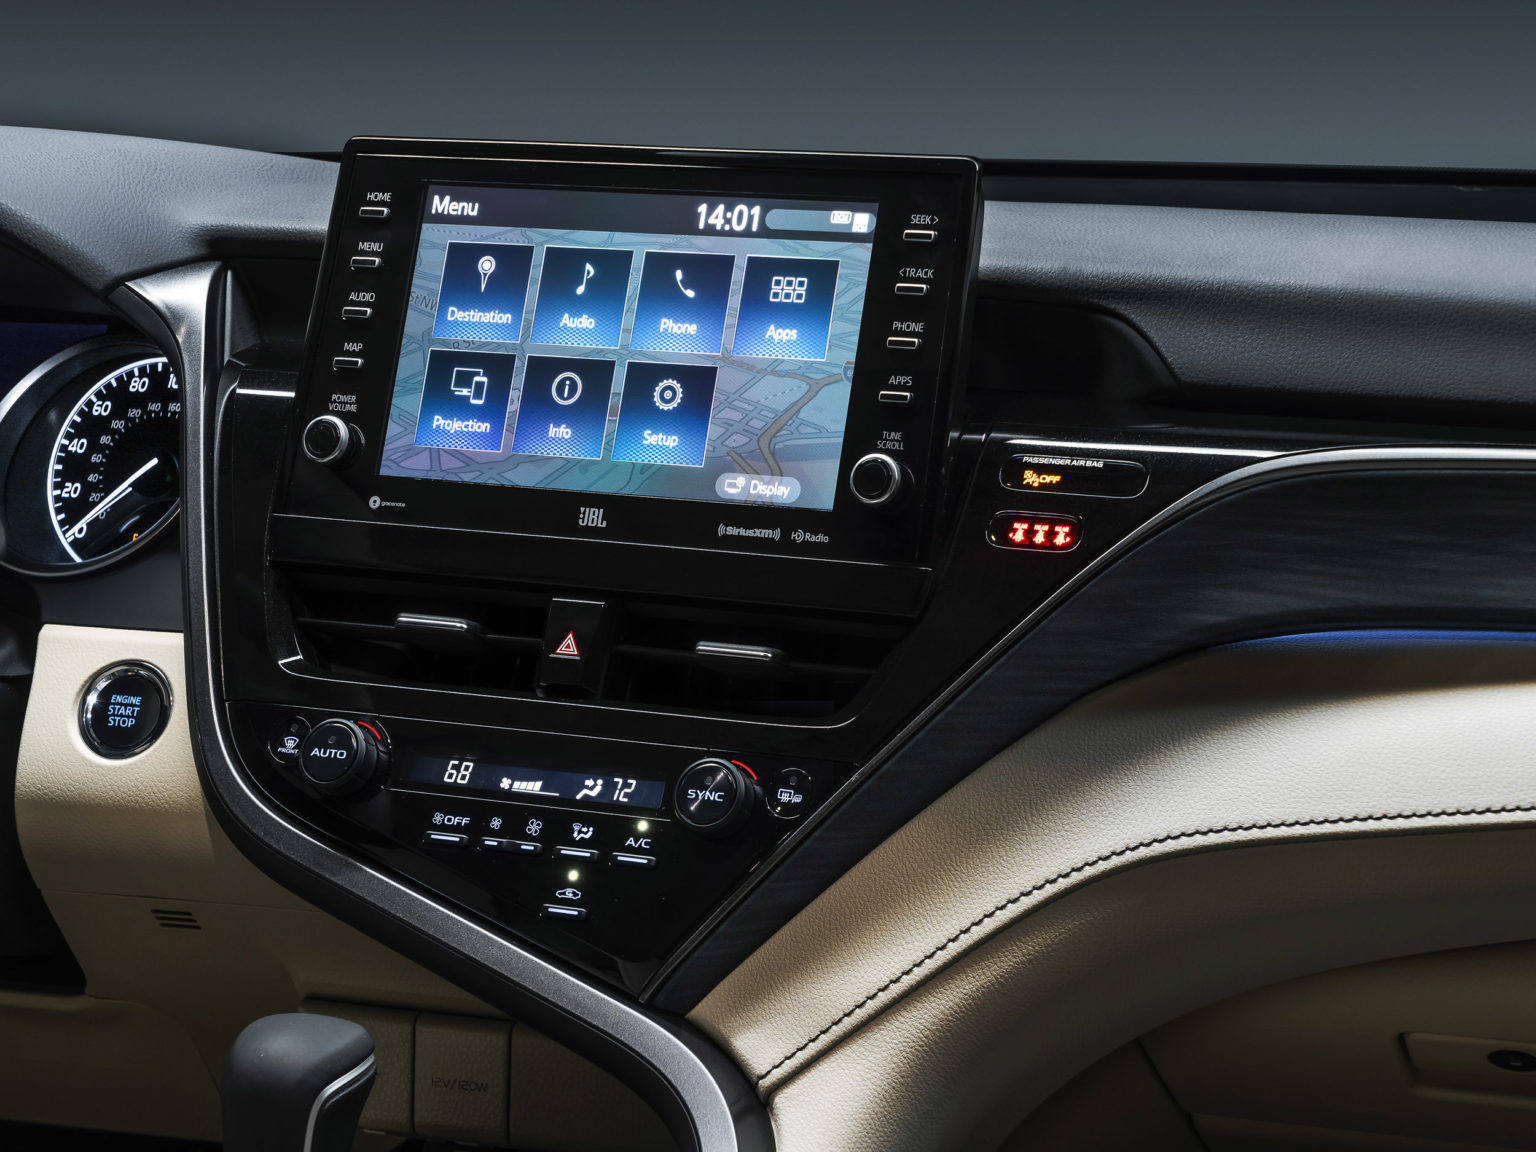 Toyota has given the Camry a new standard 7.0-inch infotainment touch screen.